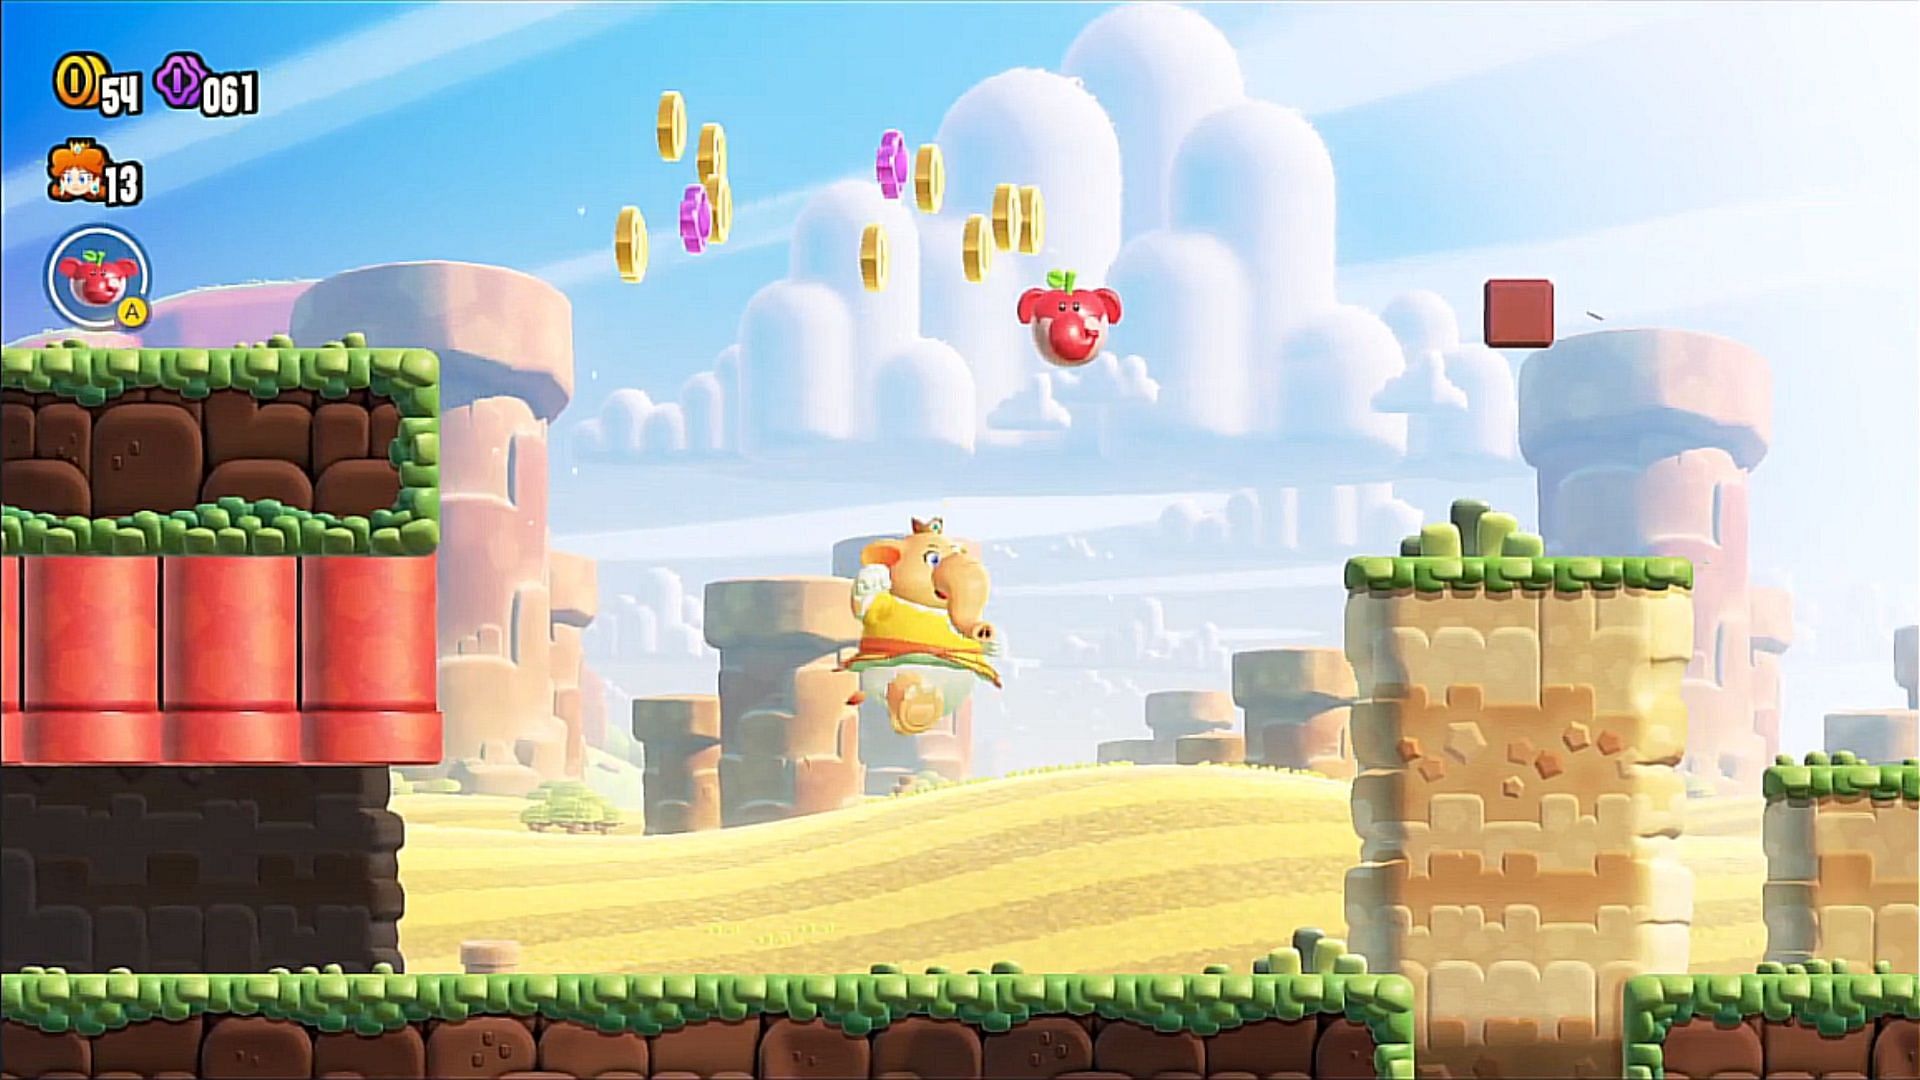 Super Mario Bros. Wonder review: One of the best 2D Mario games ever